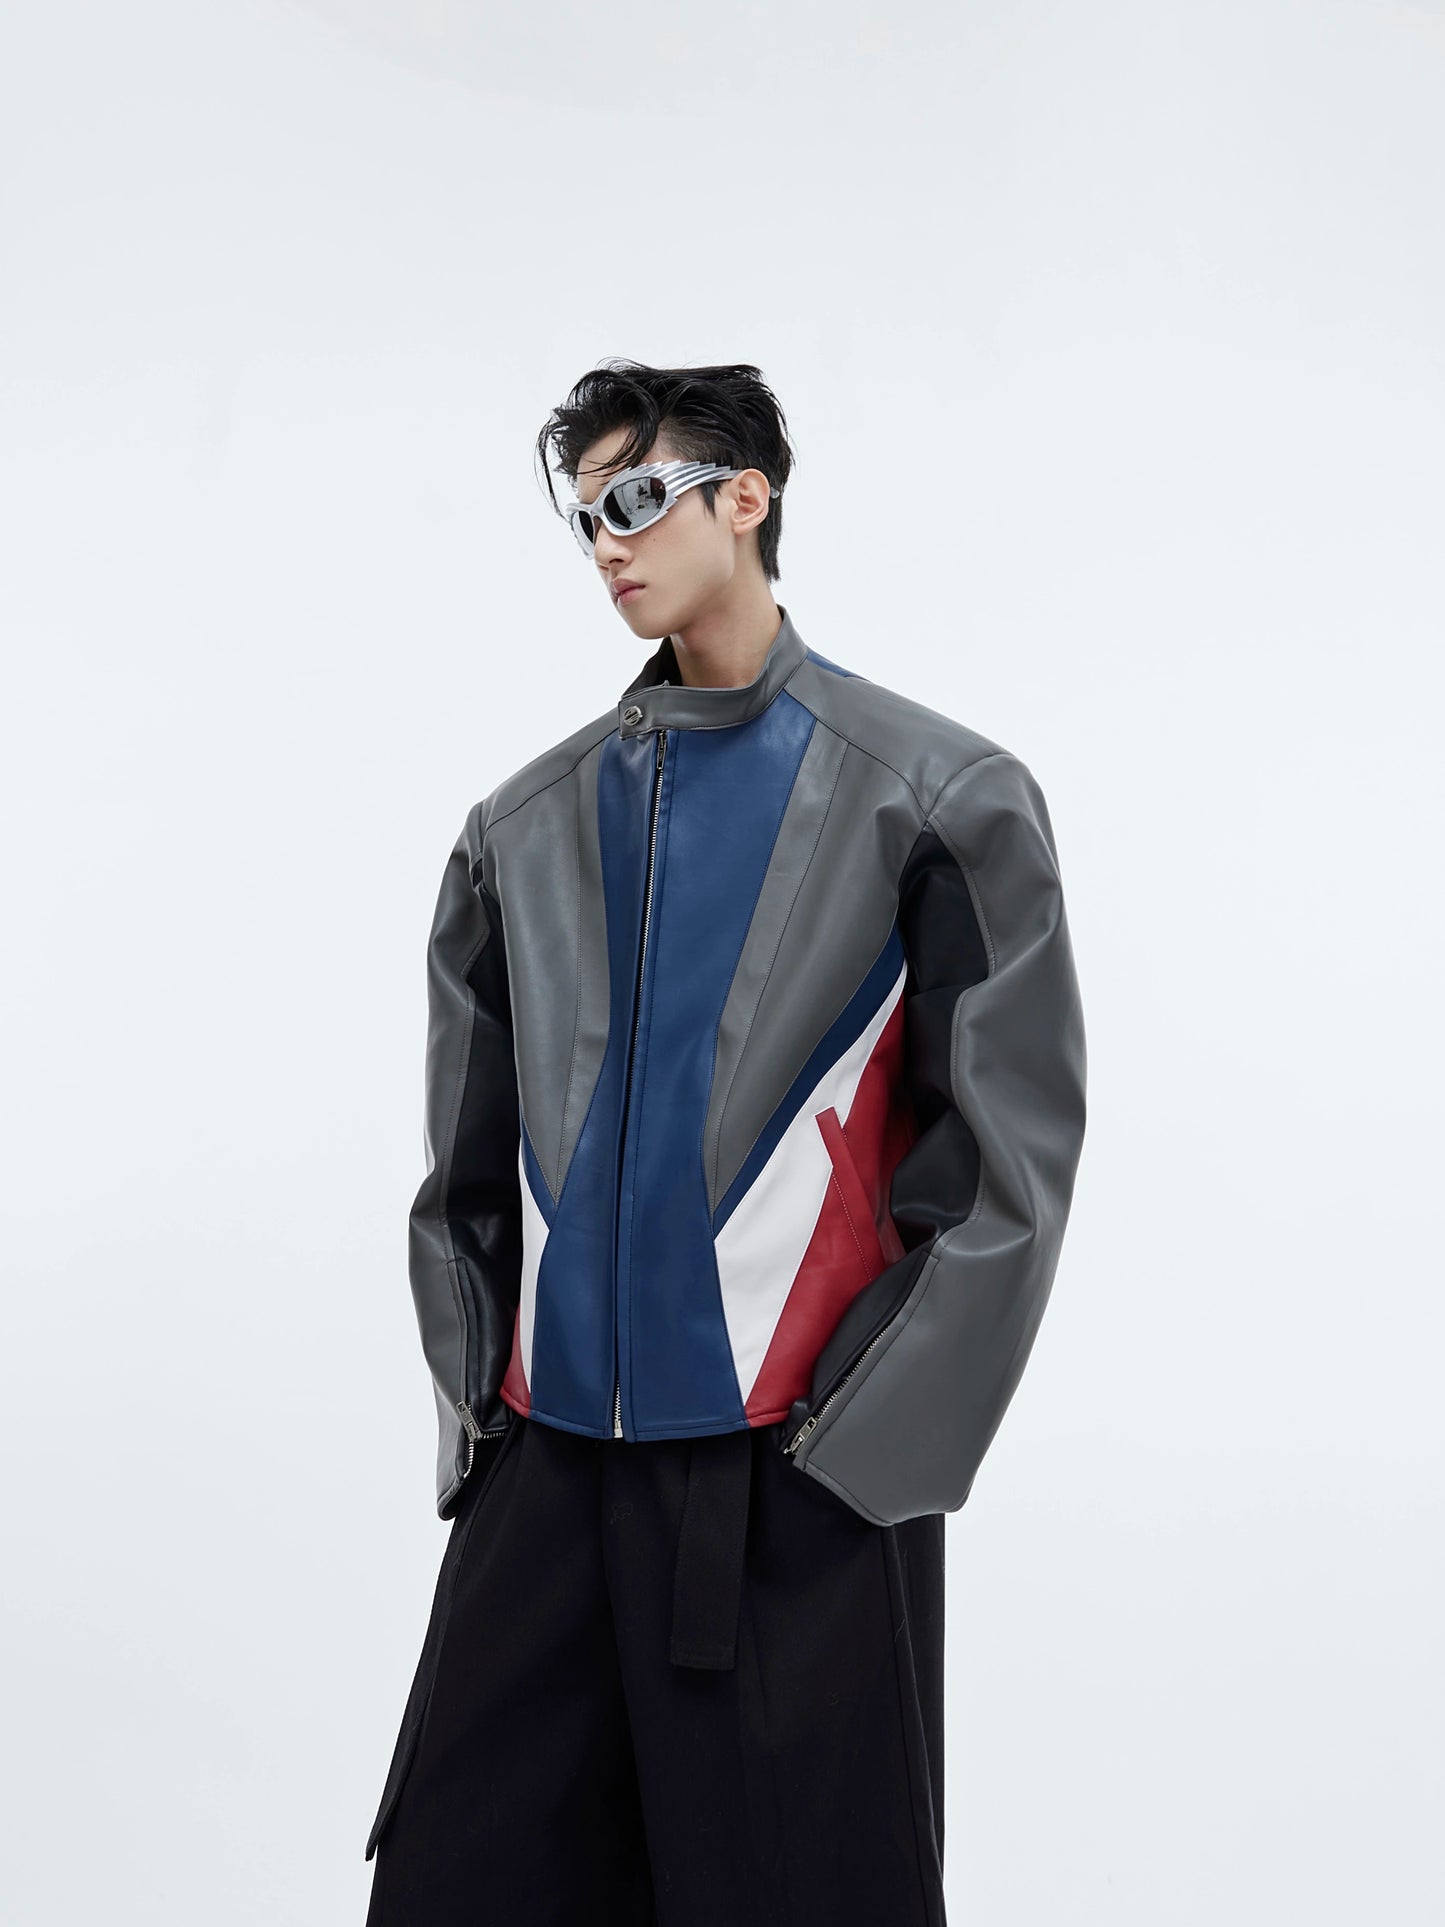 Cultur E24ss spring style niche deconstructed stitching contrasting biker suit PU leather padded shoulder silhouette jacket jacket